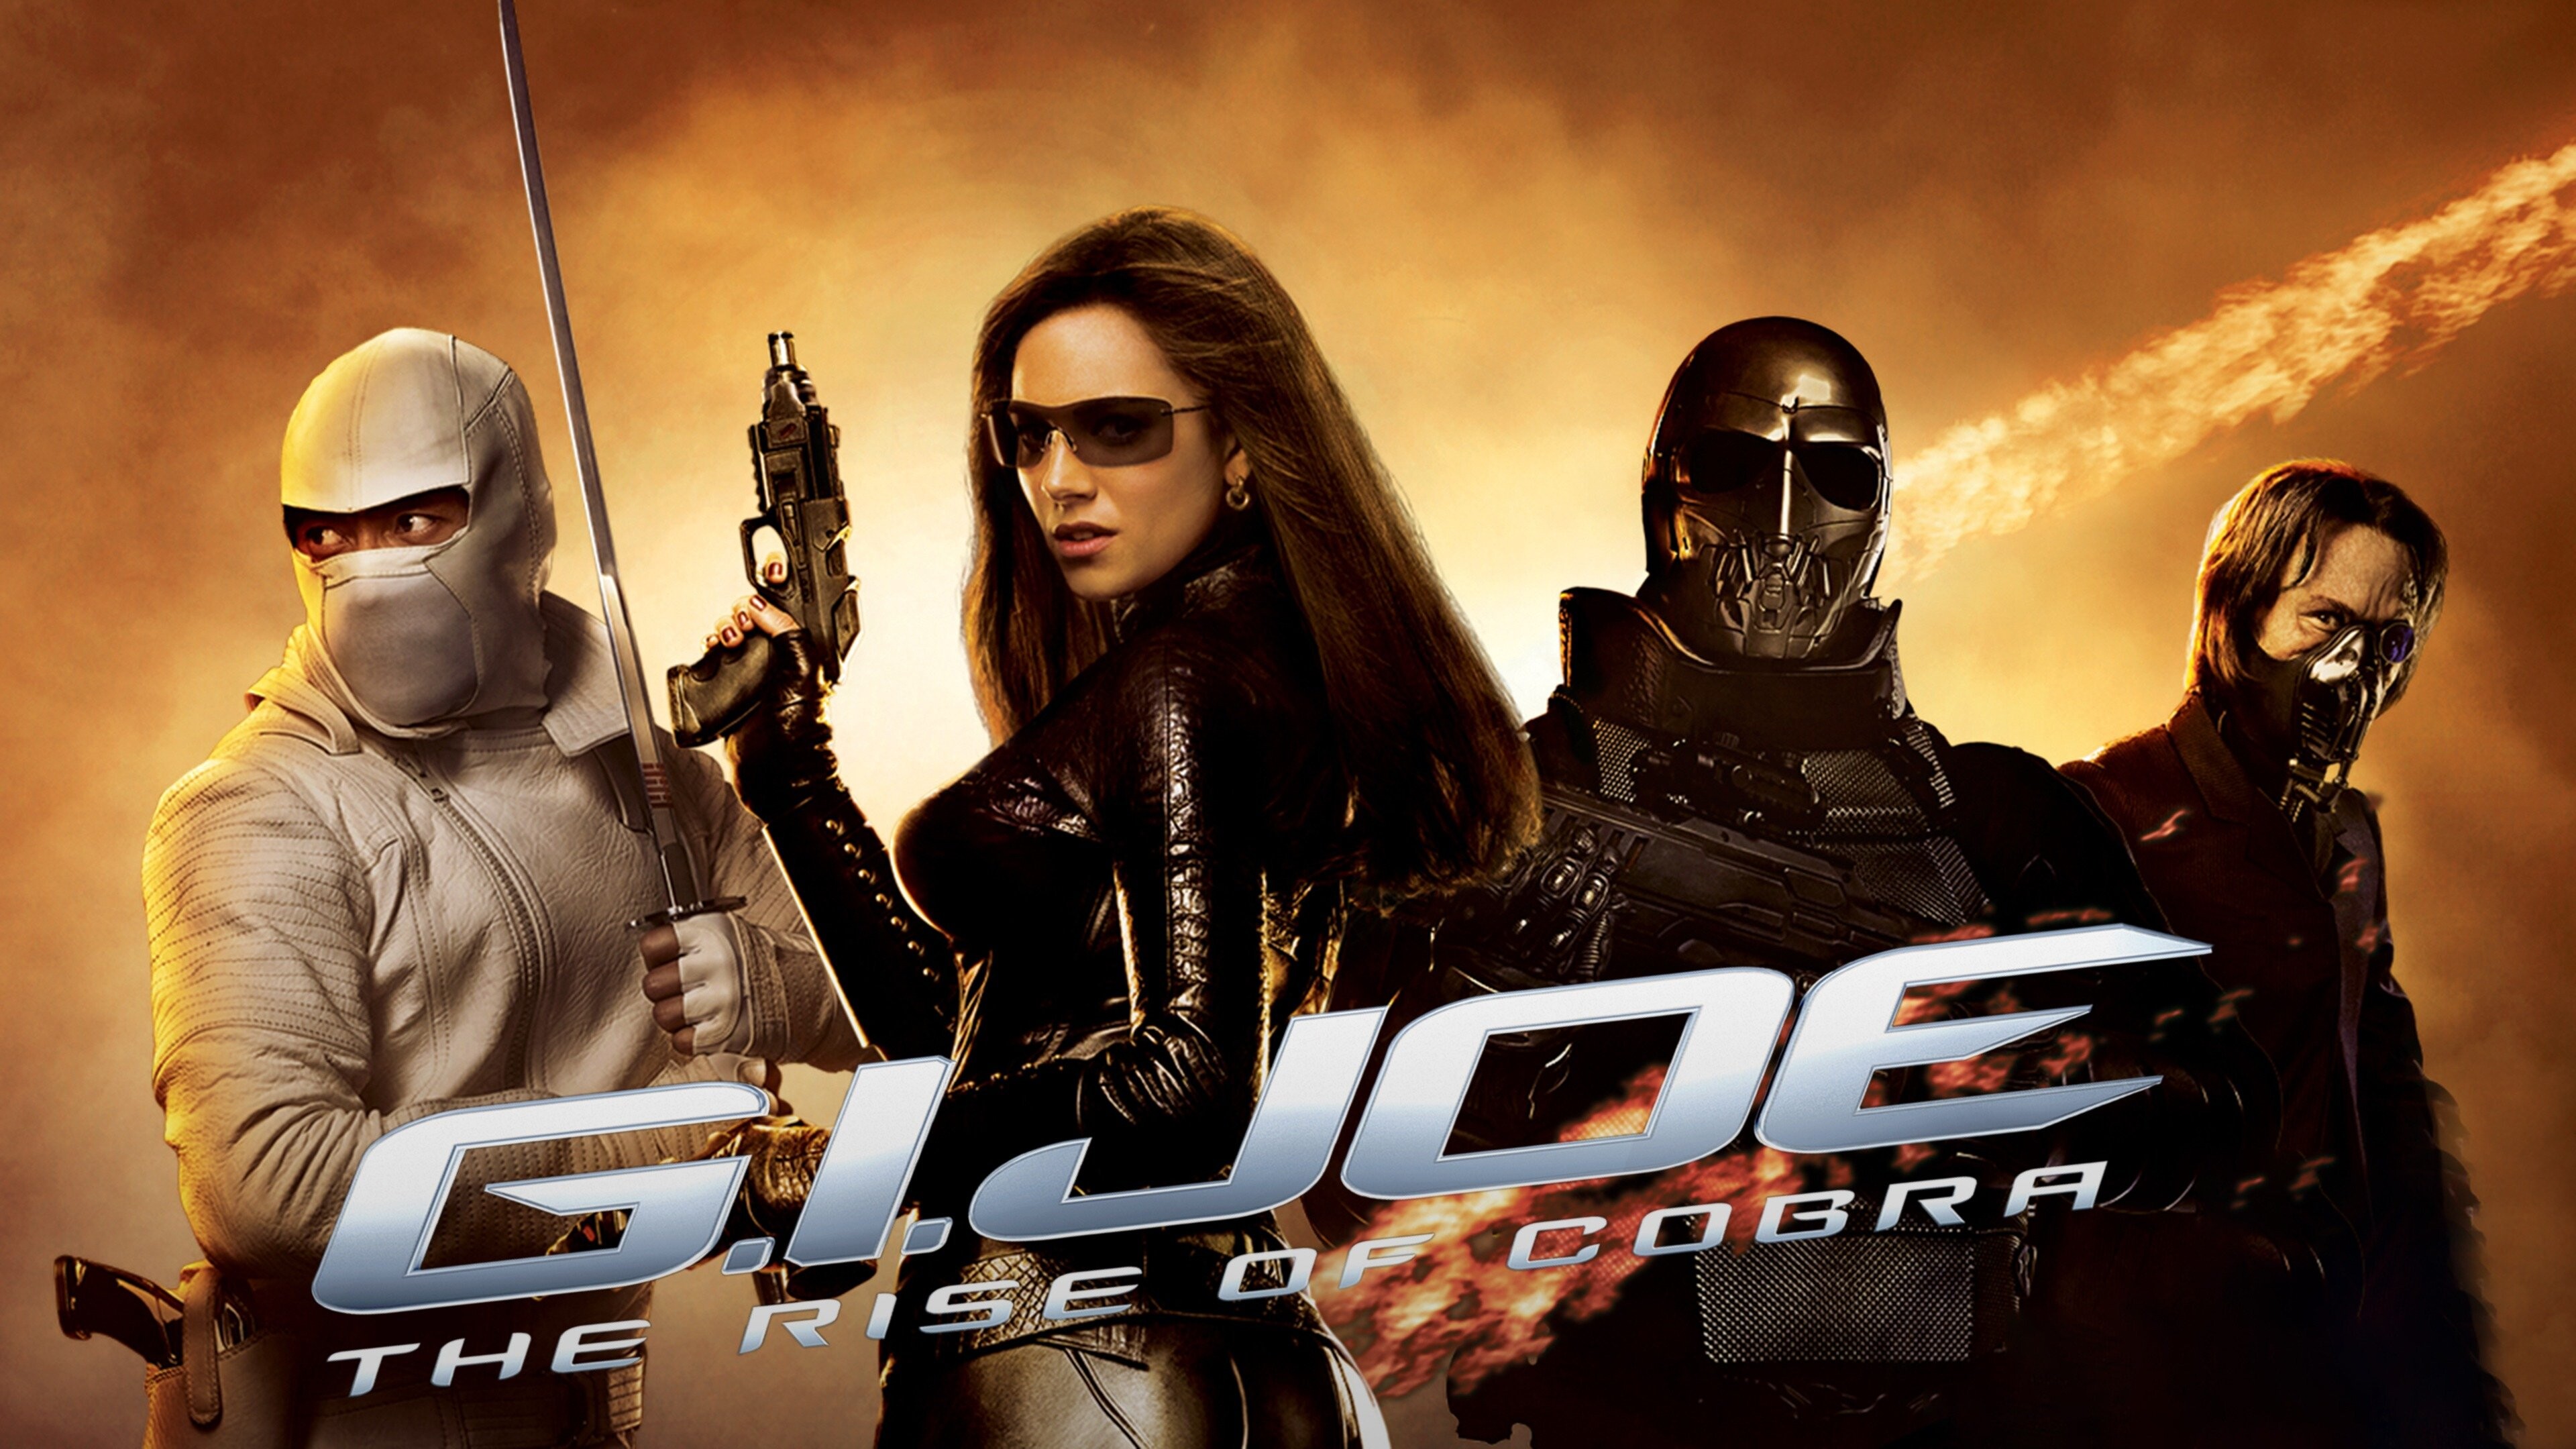 G.I. Joe (Movie): The Rise Of Cobra, Science Fiction Action Film, Stephen Sommers, 2009. 3840x2160 4K Background.